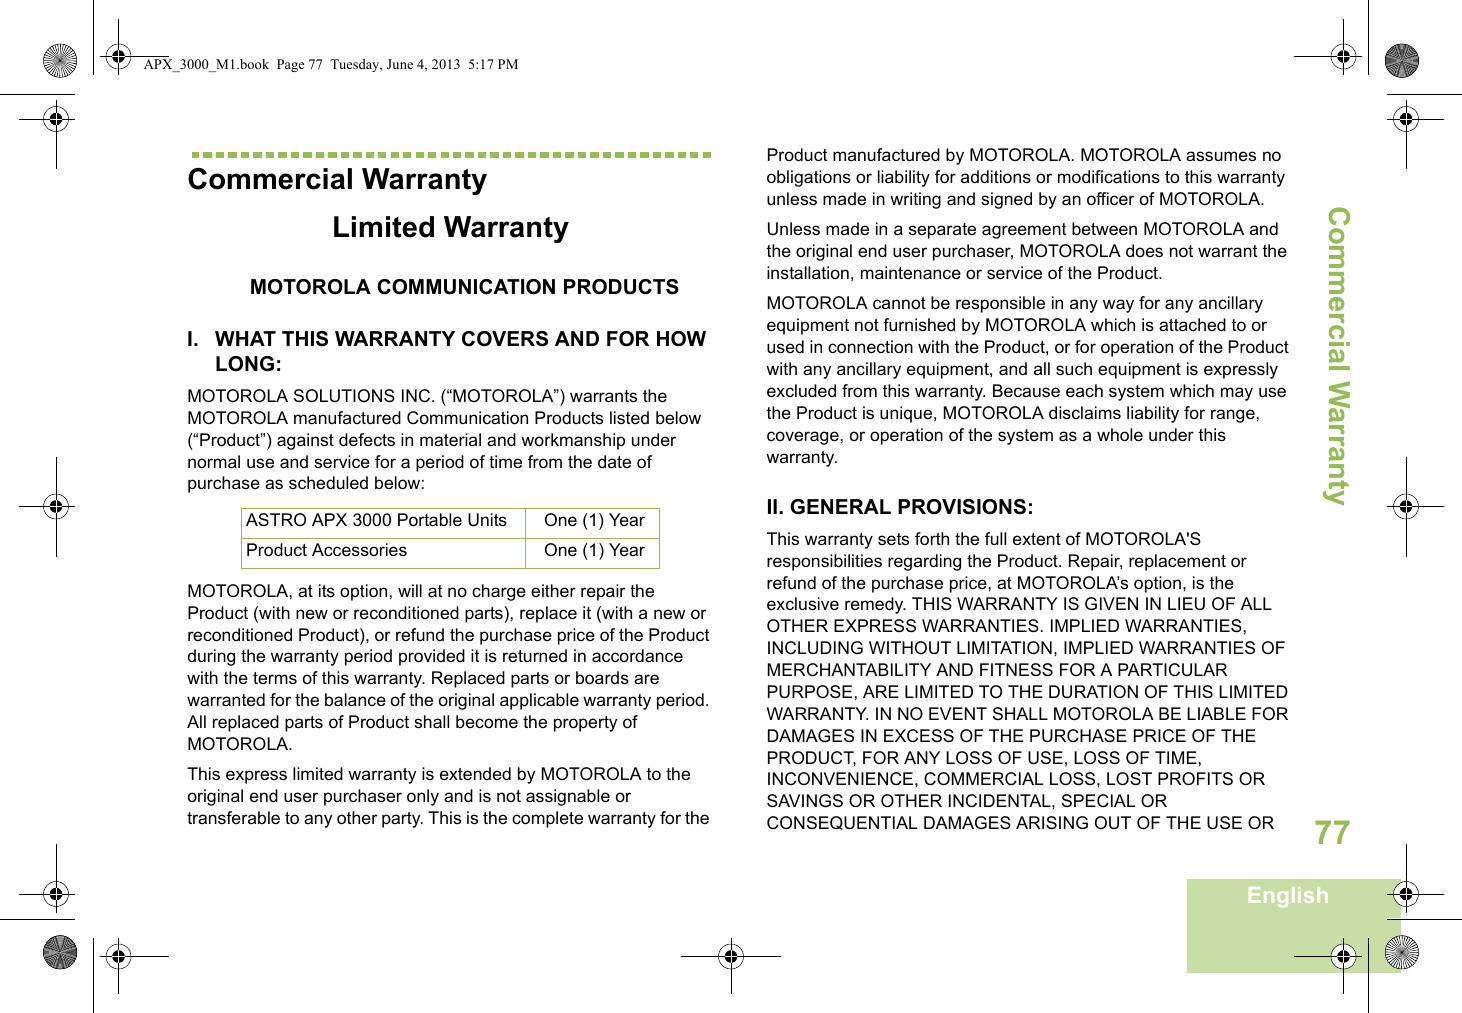 Commercial WarrantyEnglish77Commercial WarrantyLimited WarrantyMOTOROLA COMMUNICATION PRODUCTSI. WHAT THIS WARRANTY COVERS AND FOR HOW LONG:MOTOROLA SOLUTIONS INC. (“MOTOROLA”) warrants the MOTOROLA manufactured Communication Products listed below (“Product”) against defects in material and workmanship under normal use and service for a period of time from the date of purchase as scheduled below:MOTOROLA, at its option, will at no charge either repair the Product (with new or reconditioned parts), replace it (with a new or reconditioned Product), or refund the purchase price of the Product during the warranty period provided it is returned in accordance with the terms of this warranty. Replaced parts or boards are warranted for the balance of the original applicable warranty period. All replaced parts of Product shall become the property of MOTOROLA.This express limited warranty is extended by MOTOROLA to the original end user purchaser only and is not assignable or transferable to any other party. This is the complete warranty for the Product manufactured by MOTOROLA. MOTOROLA assumes no obligations or liability for additions or modifications to this warranty unless made in writing and signed by an officer of MOTOROLA. Unless made in a separate agreement between MOTOROLA and the original end user purchaser, MOTOROLA does not warrant the installation, maintenance or service of the Product.MOTOROLA cannot be responsible in any way for any ancillary equipment not furnished by MOTOROLA which is attached to or used in connection with the Product, or for operation of the Product with any ancillary equipment, and all such equipment is expressly excluded from this warranty. Because each system which may use the Product is unique, MOTOROLA disclaims liability for range, coverage, or operation of the system as a whole under this warranty.II. GENERAL PROVISIONS:This warranty sets forth the full extent of MOTOROLA&apos;S responsibilities regarding the Product. Repair, replacement or refund of the purchase price, at MOTOROLA’s option, is the exclusive remedy. THIS WARRANTY IS GIVEN IN LIEU OF ALL OTHER EXPRESS WARRANTIES. IMPLIED WARRANTIES, INCLUDING WITHOUT LIMITATION, IMPLIED WARRANTIES OF MERCHANTABILITY AND FITNESS FOR A PARTICULAR PURPOSE, ARE LIMITED TO THE DURATION OF THIS LIMITED WARRANTY. IN NO EVENT SHALL MOTOROLA BE LIABLE FOR DAMAGES IN EXCESS OF THE PURCHASE PRICE OF THE PRODUCT, FOR ANY LOSS OF USE, LOSS OF TIME, INCONVENIENCE, COMMERCIAL LOSS, LOST PROFITS OR SAVINGS OR OTHER INCIDENTAL, SPECIAL OR CONSEQUENTIAL DAMAGES ARISING OUT OF THE USE OR ASTRO APX 3000 Portable Units One (1) YearProduct Accessories One (1) YearAPX_3000_M1.book  Page 77  Tuesday, June 4, 2013  5:17 PM